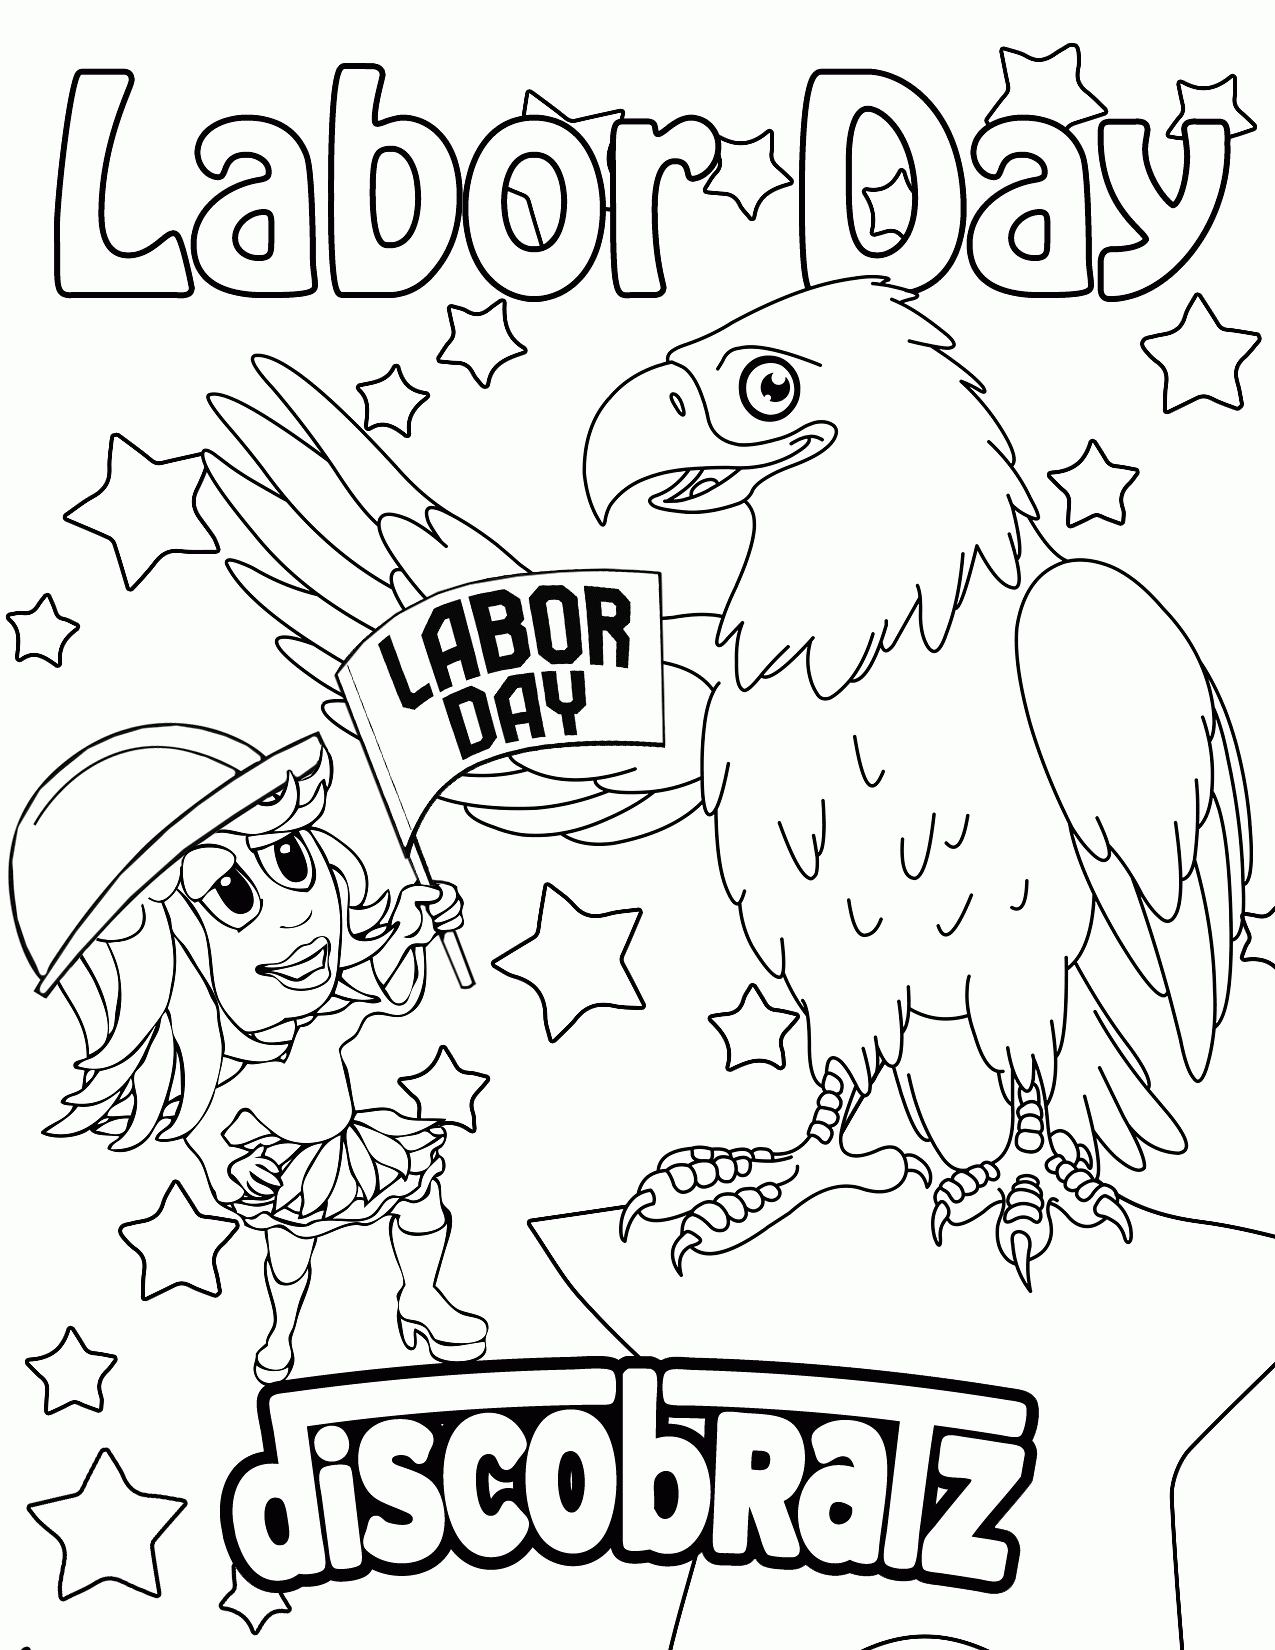 Labor Day Coloring Pages - Coloring Home